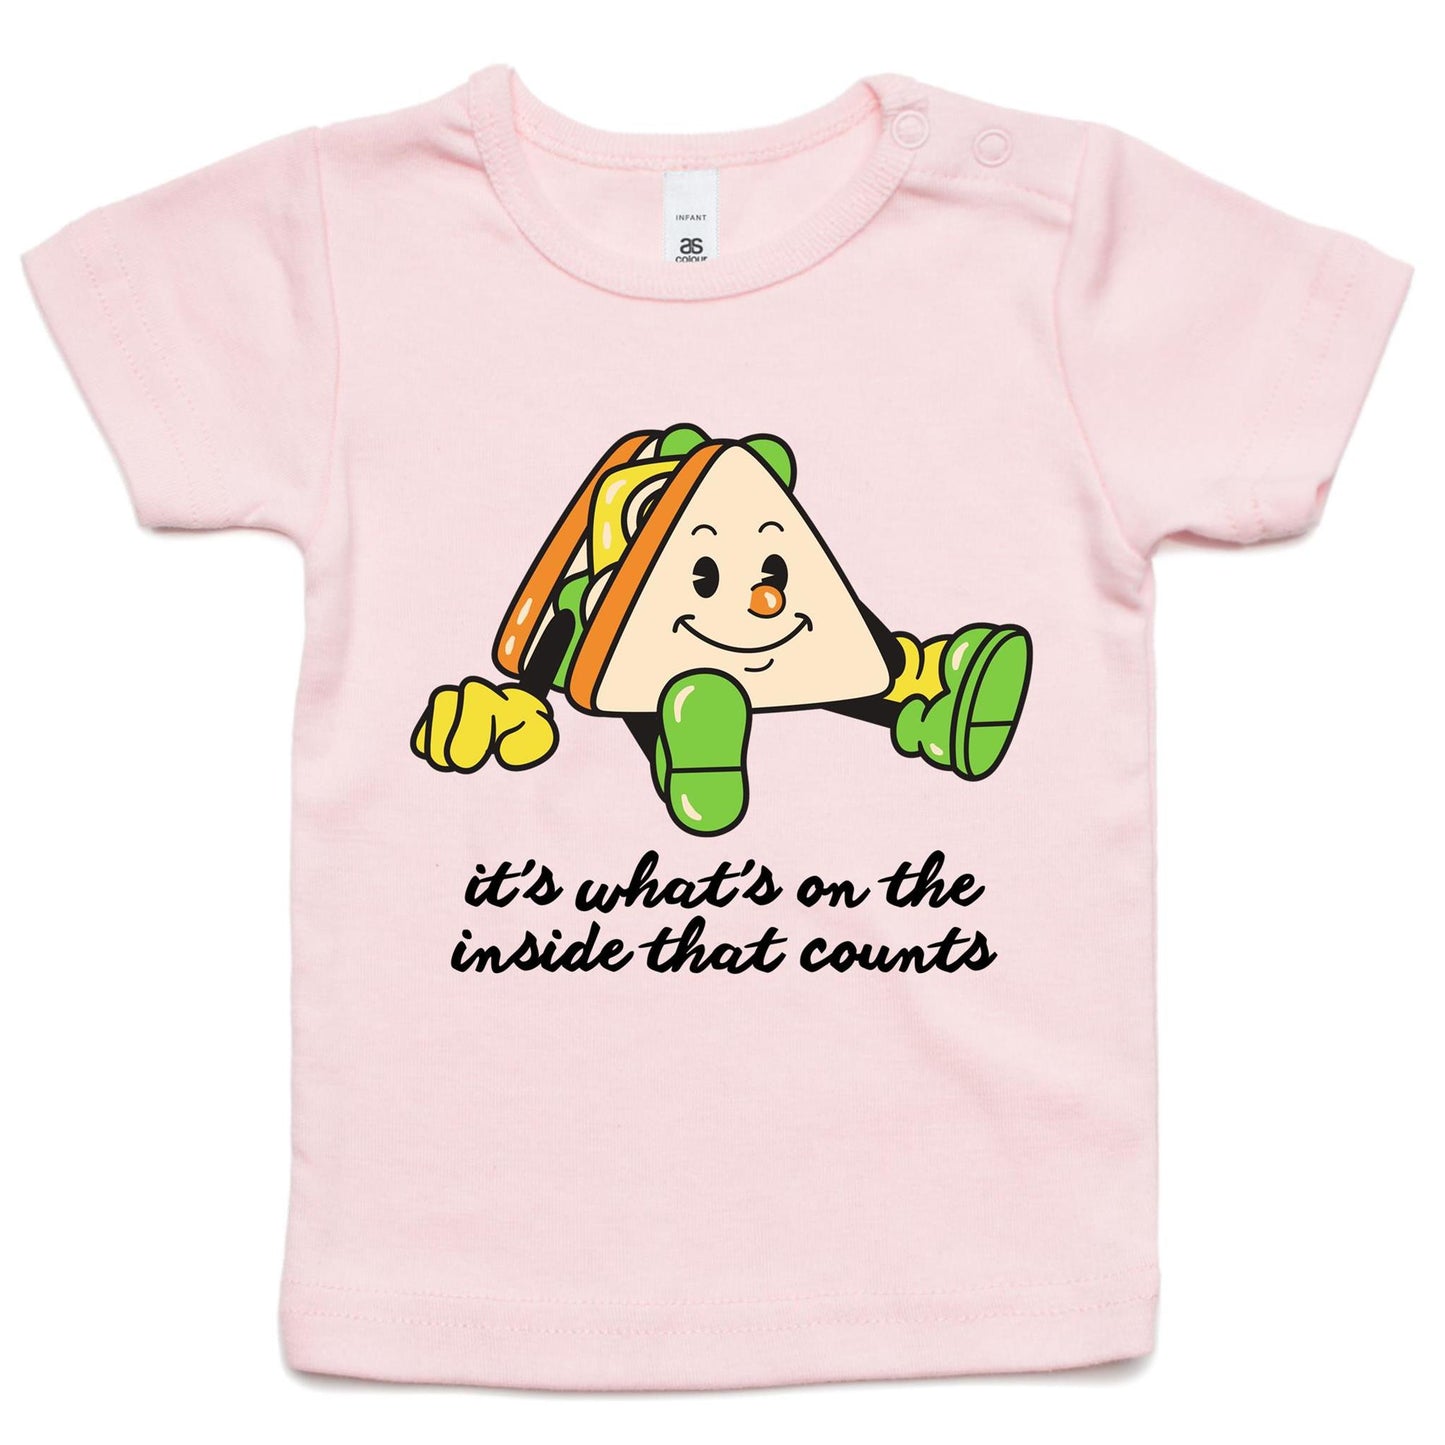 Sandwich, It's What's On The Inside That Counts - Baby T-shirt Pink Baby T-shirt Food Motivation